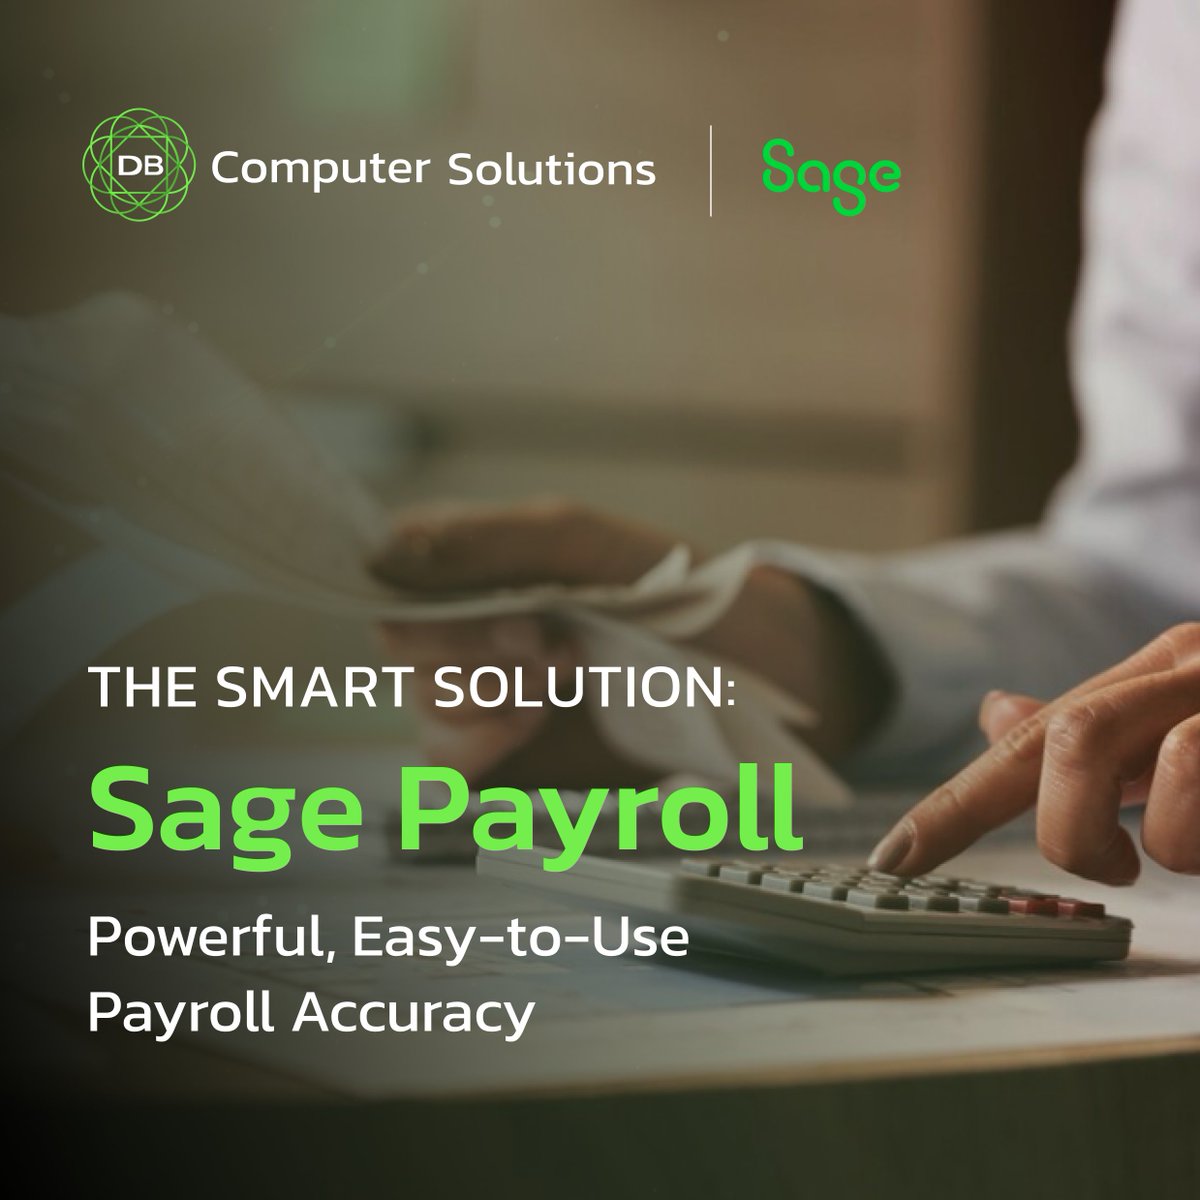 Elevate Your Payroll Experience with Sage Payroll from DB Computer Solutions!

Get in touch with us at 061480980 or email us at info@dbcomp.ie.

#SagePayroll #PayrollManagement #DBComputerSolutions #BusinessSolutions #Efficiency #Compliance #IrishBusinesses